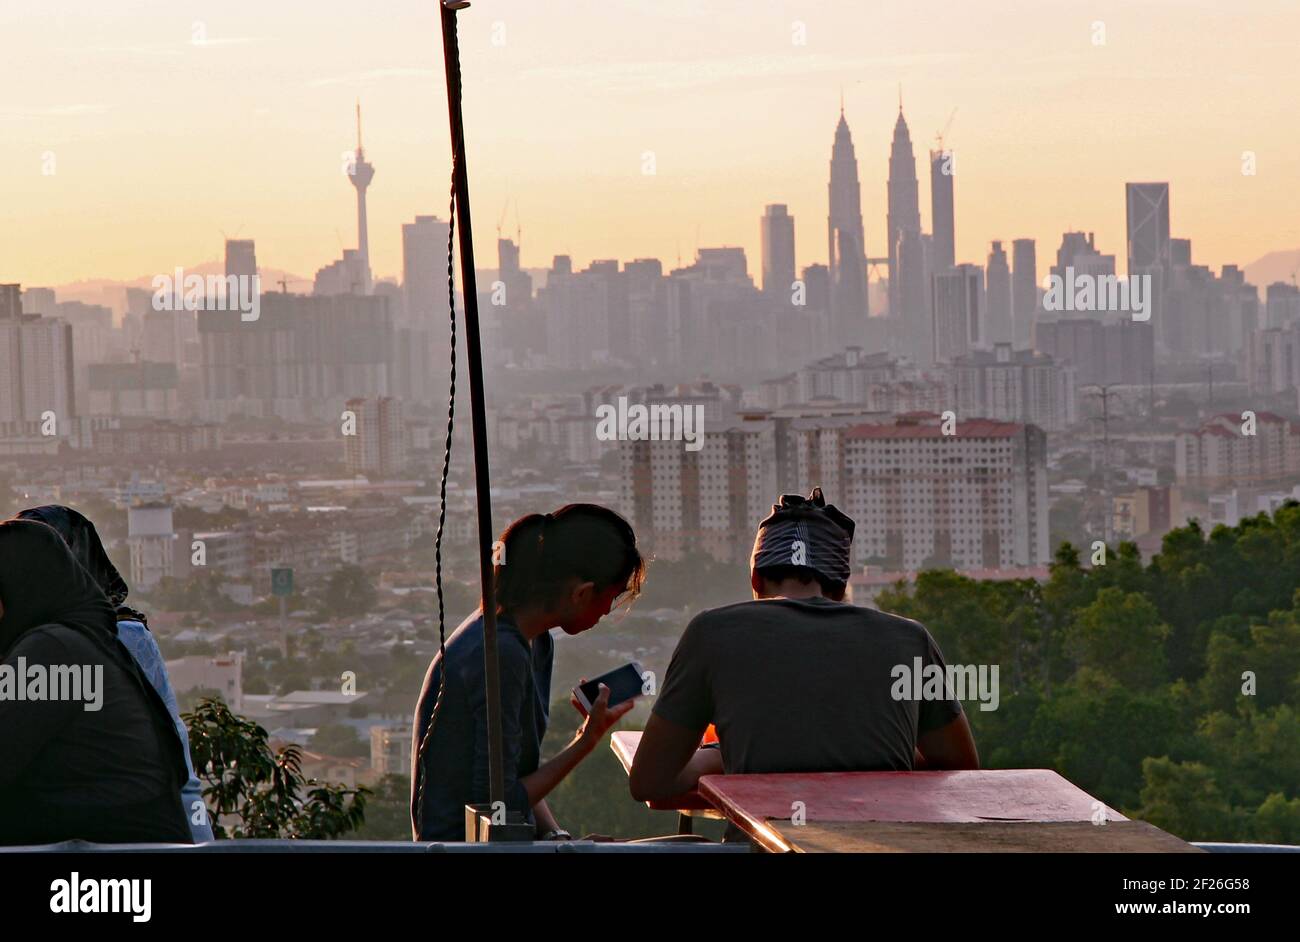 Iconic skyline of Kuala Lumpur at sunset with a young couples distracted by their smart phones Stock Photo